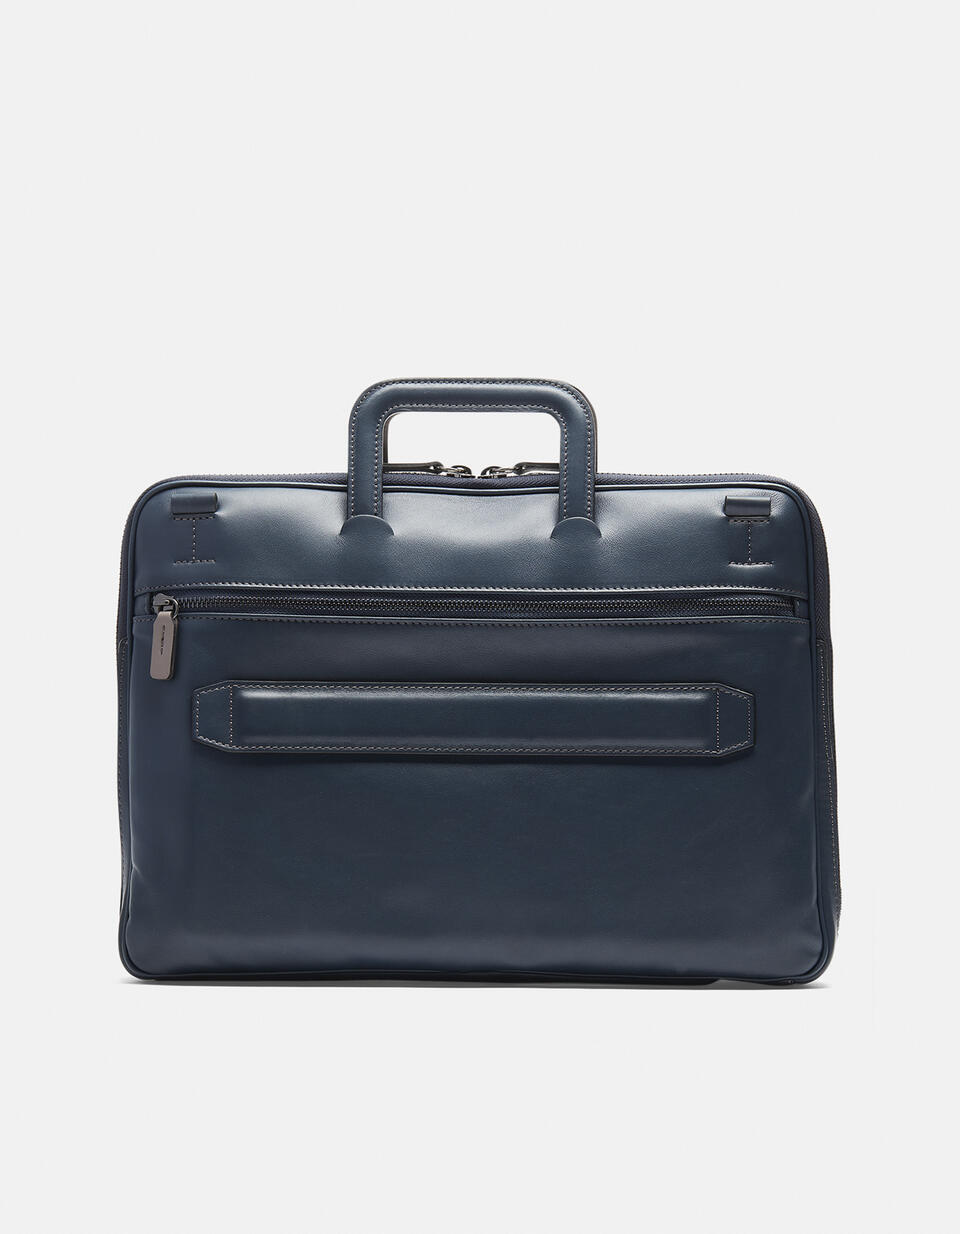 Adam Folder with retractable handles  - Briefcases And Laptop Bags - Briefcases - Cuoieria Fiorentina